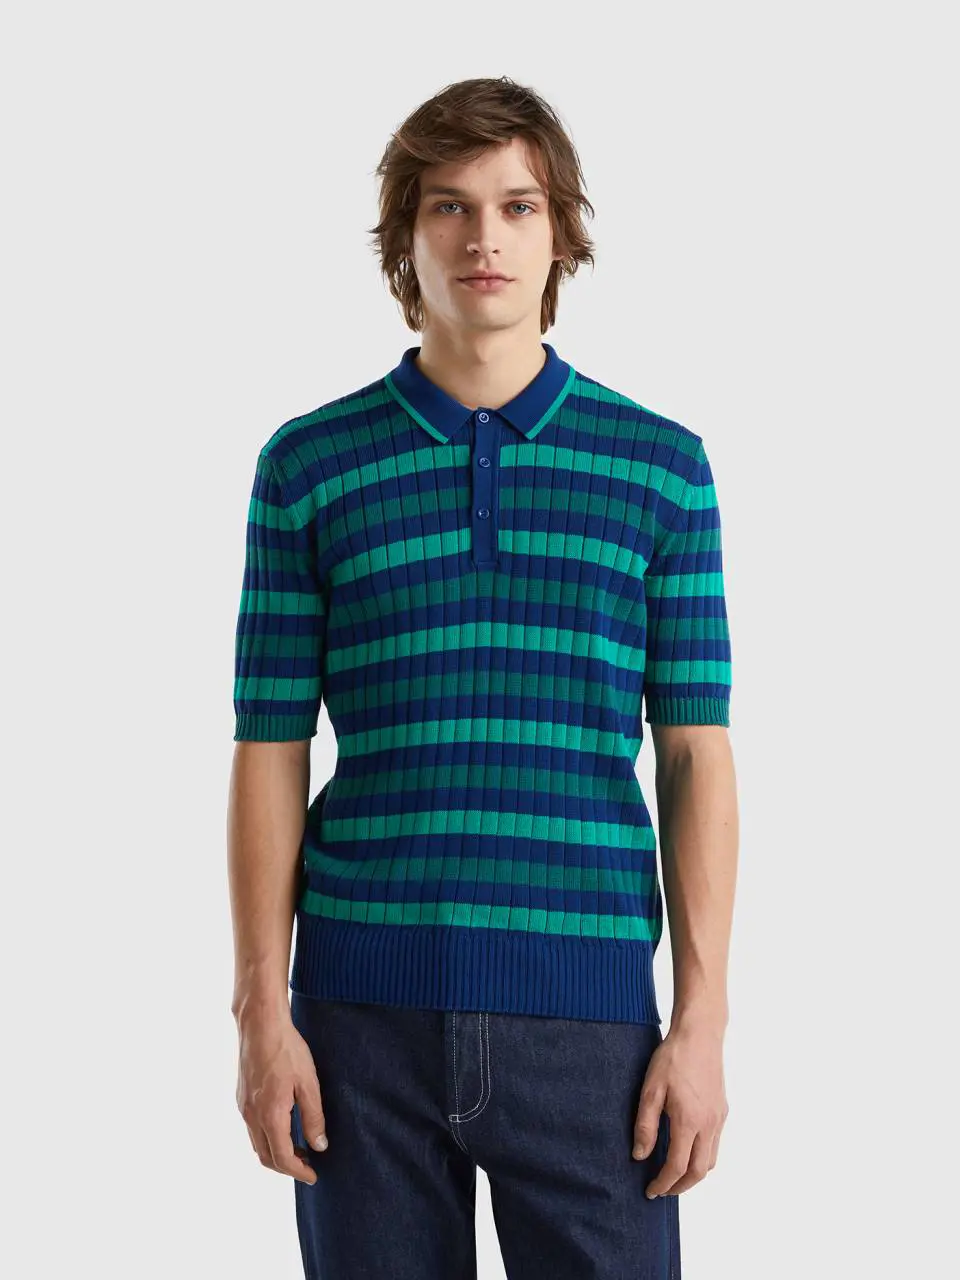 Benetton green and blue striped knit polo. 1